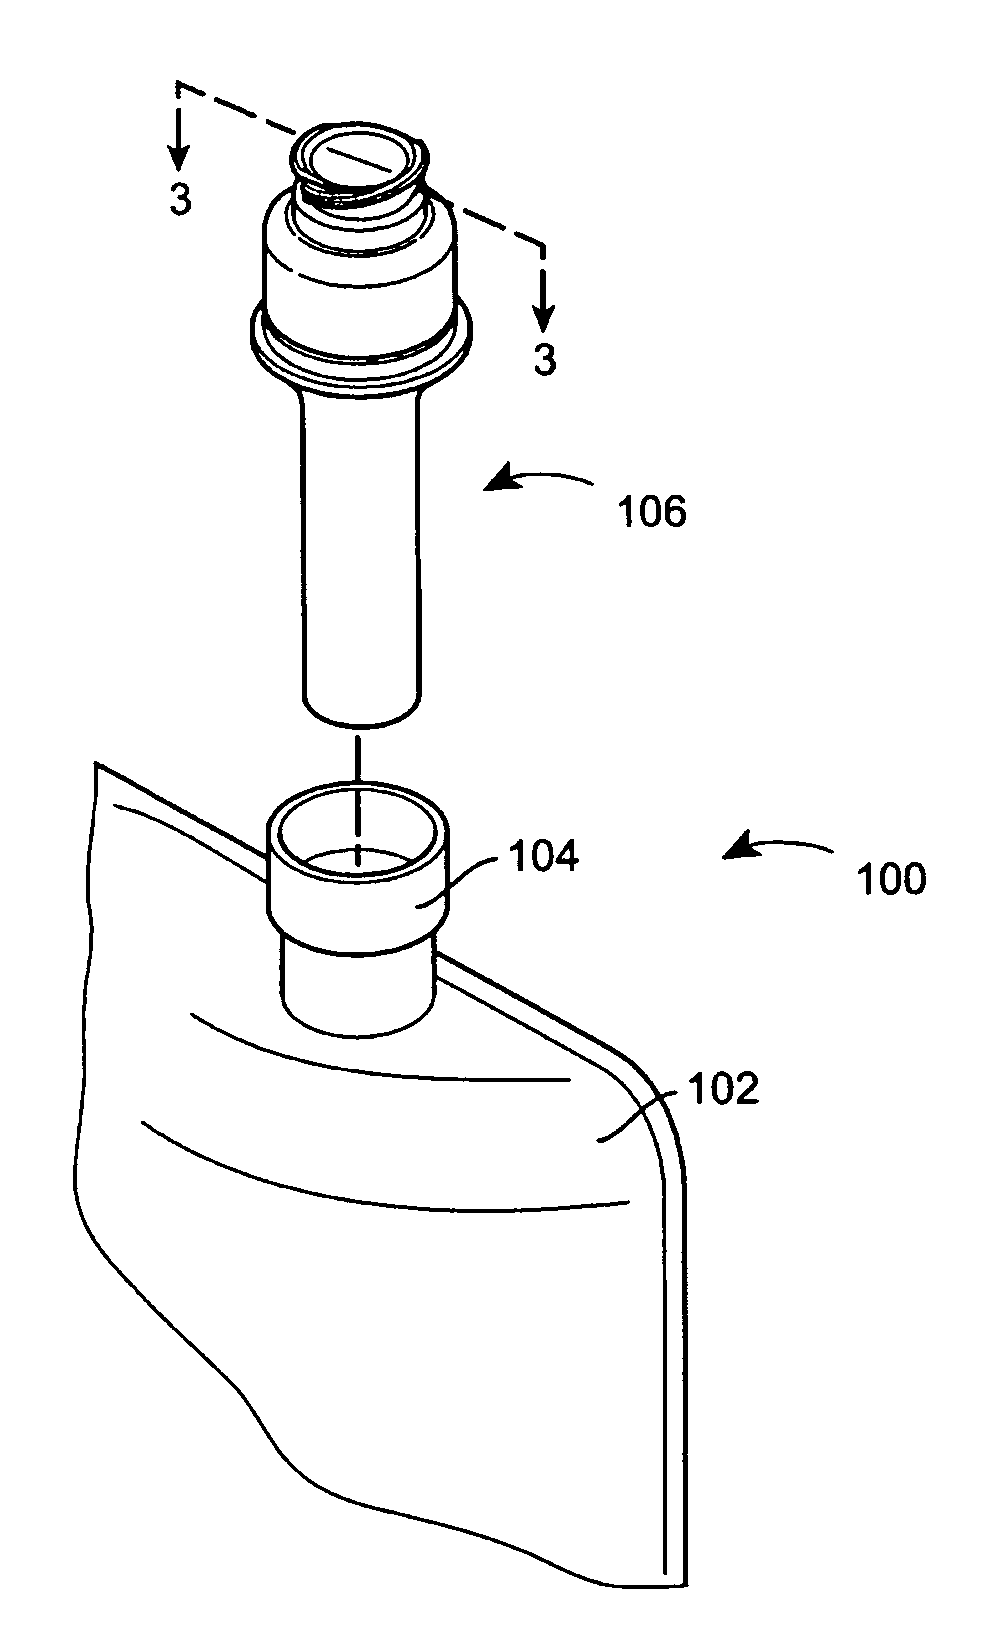 Port assembly for use with needleless connector